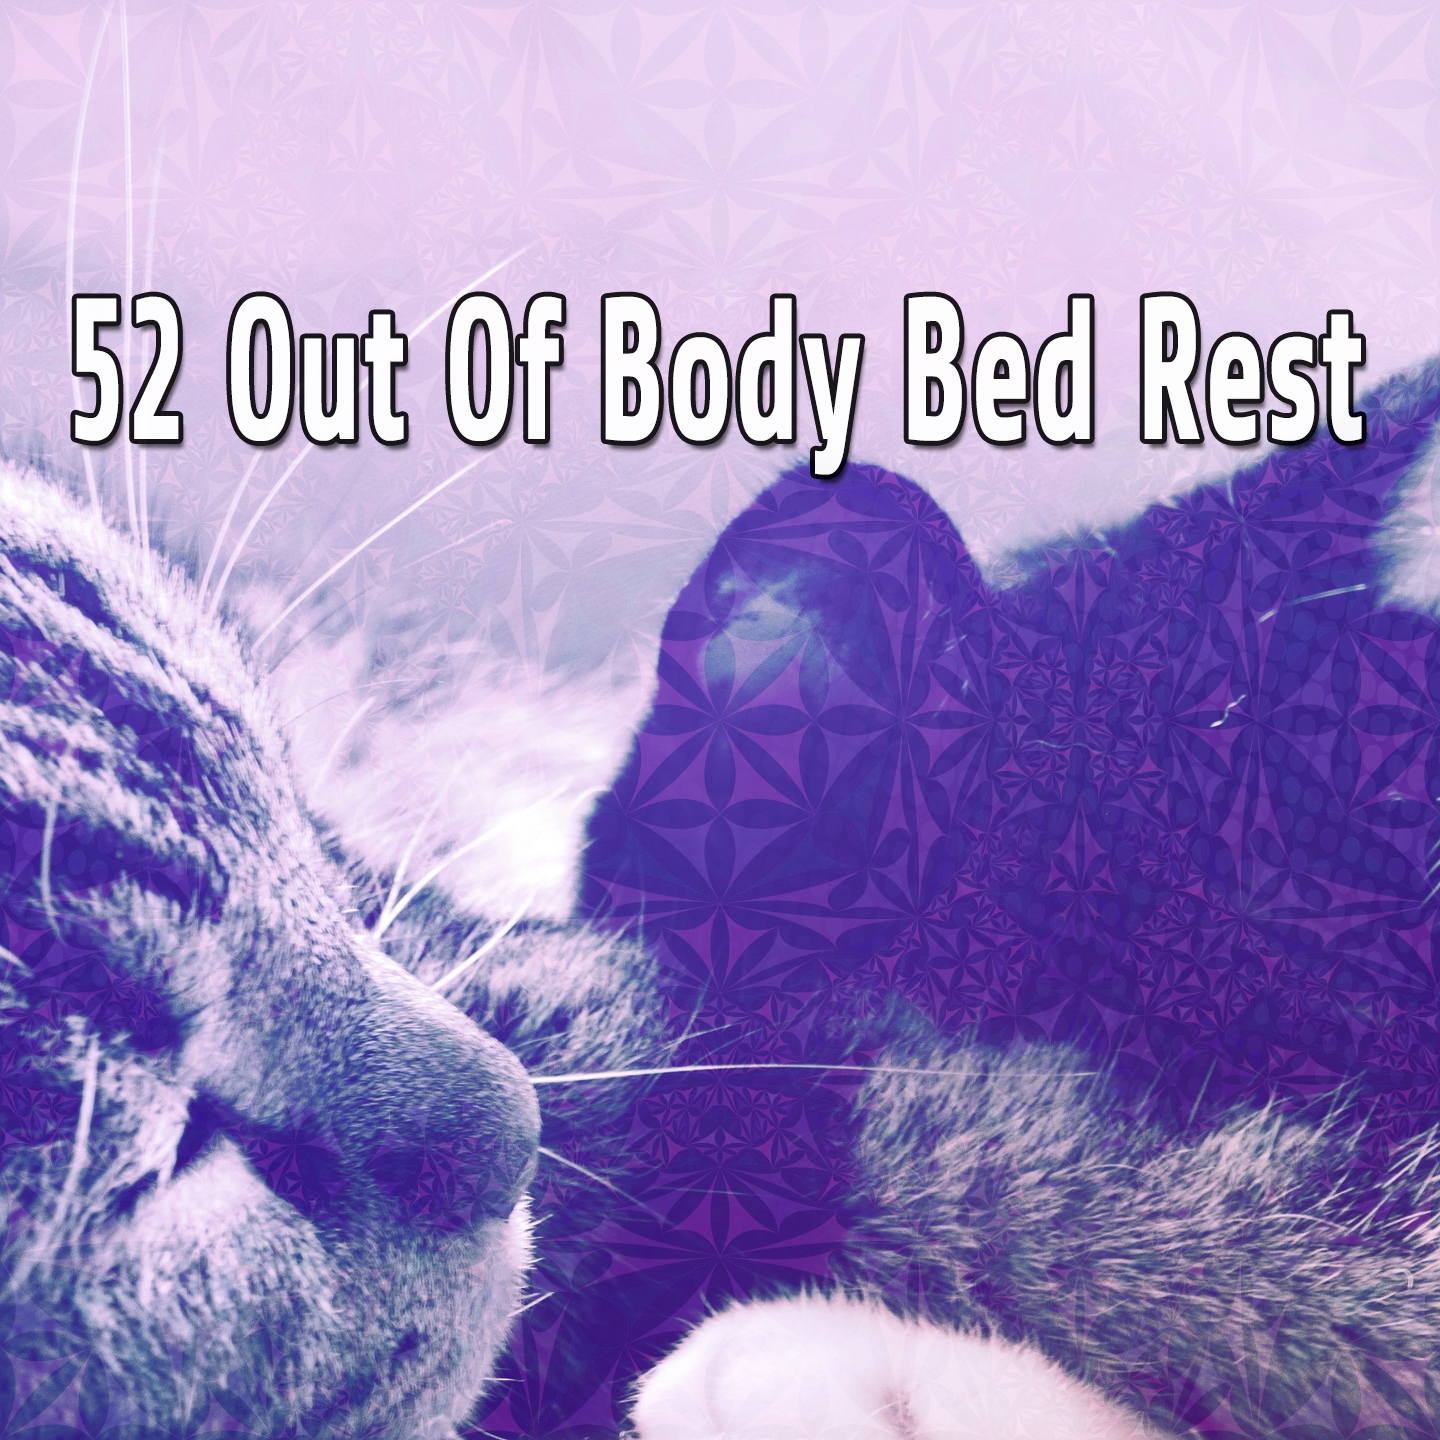 52 Out Of Body Bed Rest